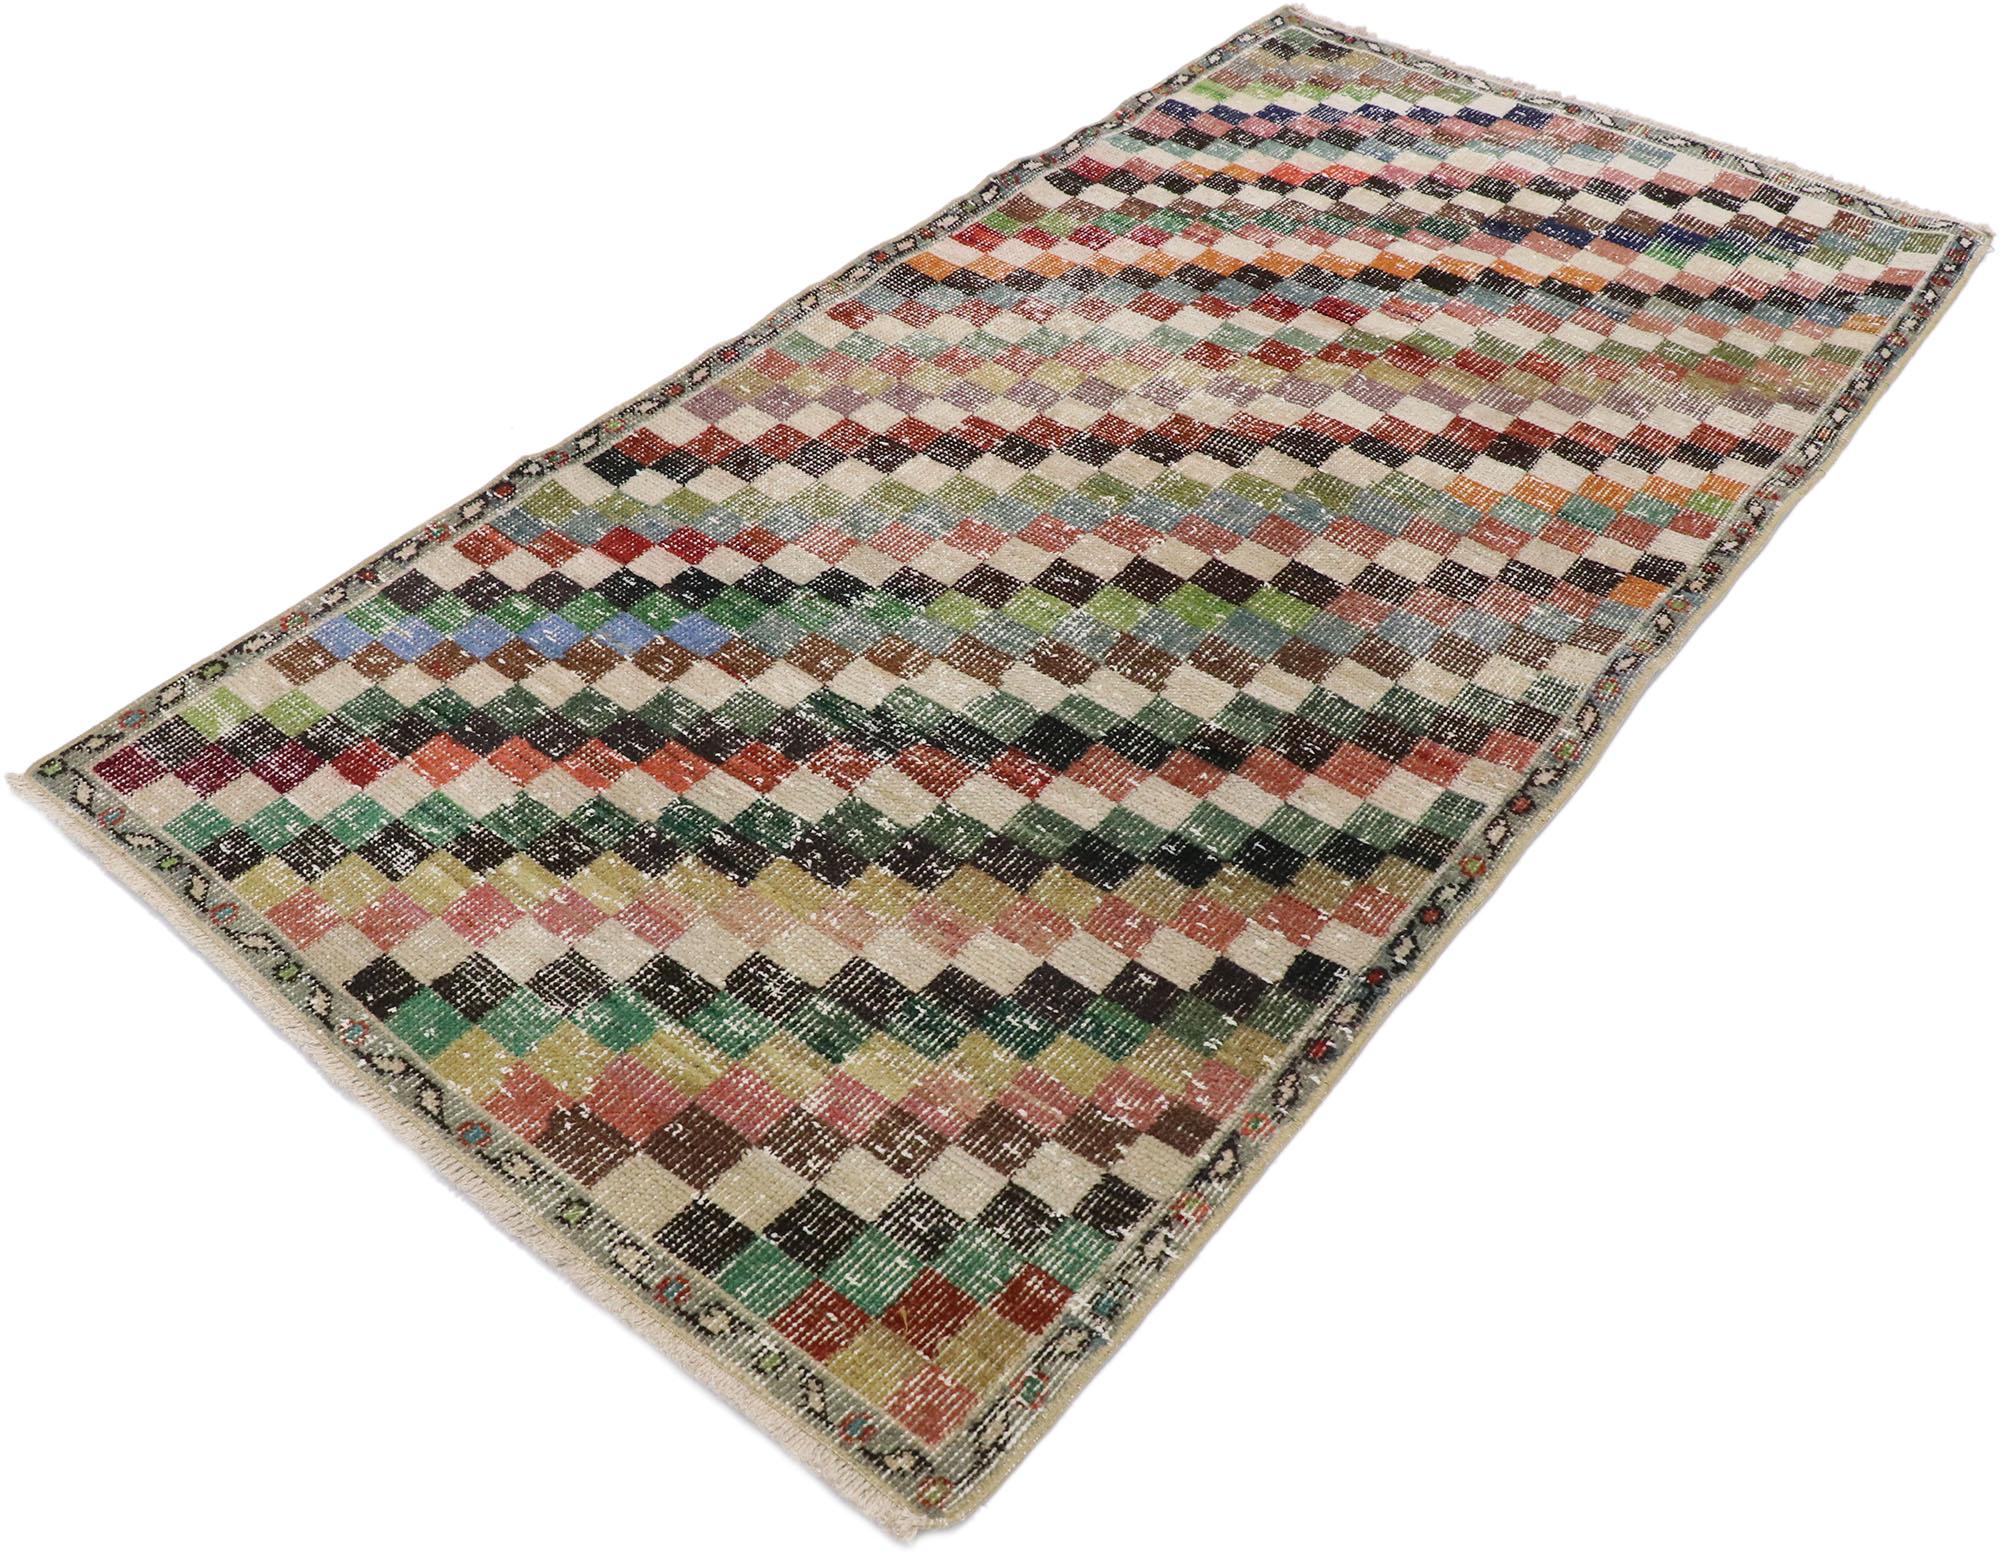 53338, Distressed Vintage Turkish Sivas Rug with Rustic Cubist Style. This hand knotted wool distressed vintage Turkish Sivas rug features an all-over checkered diagonal stripe pattern comprised of rows of multicolored diamonds. Each row of diamonds